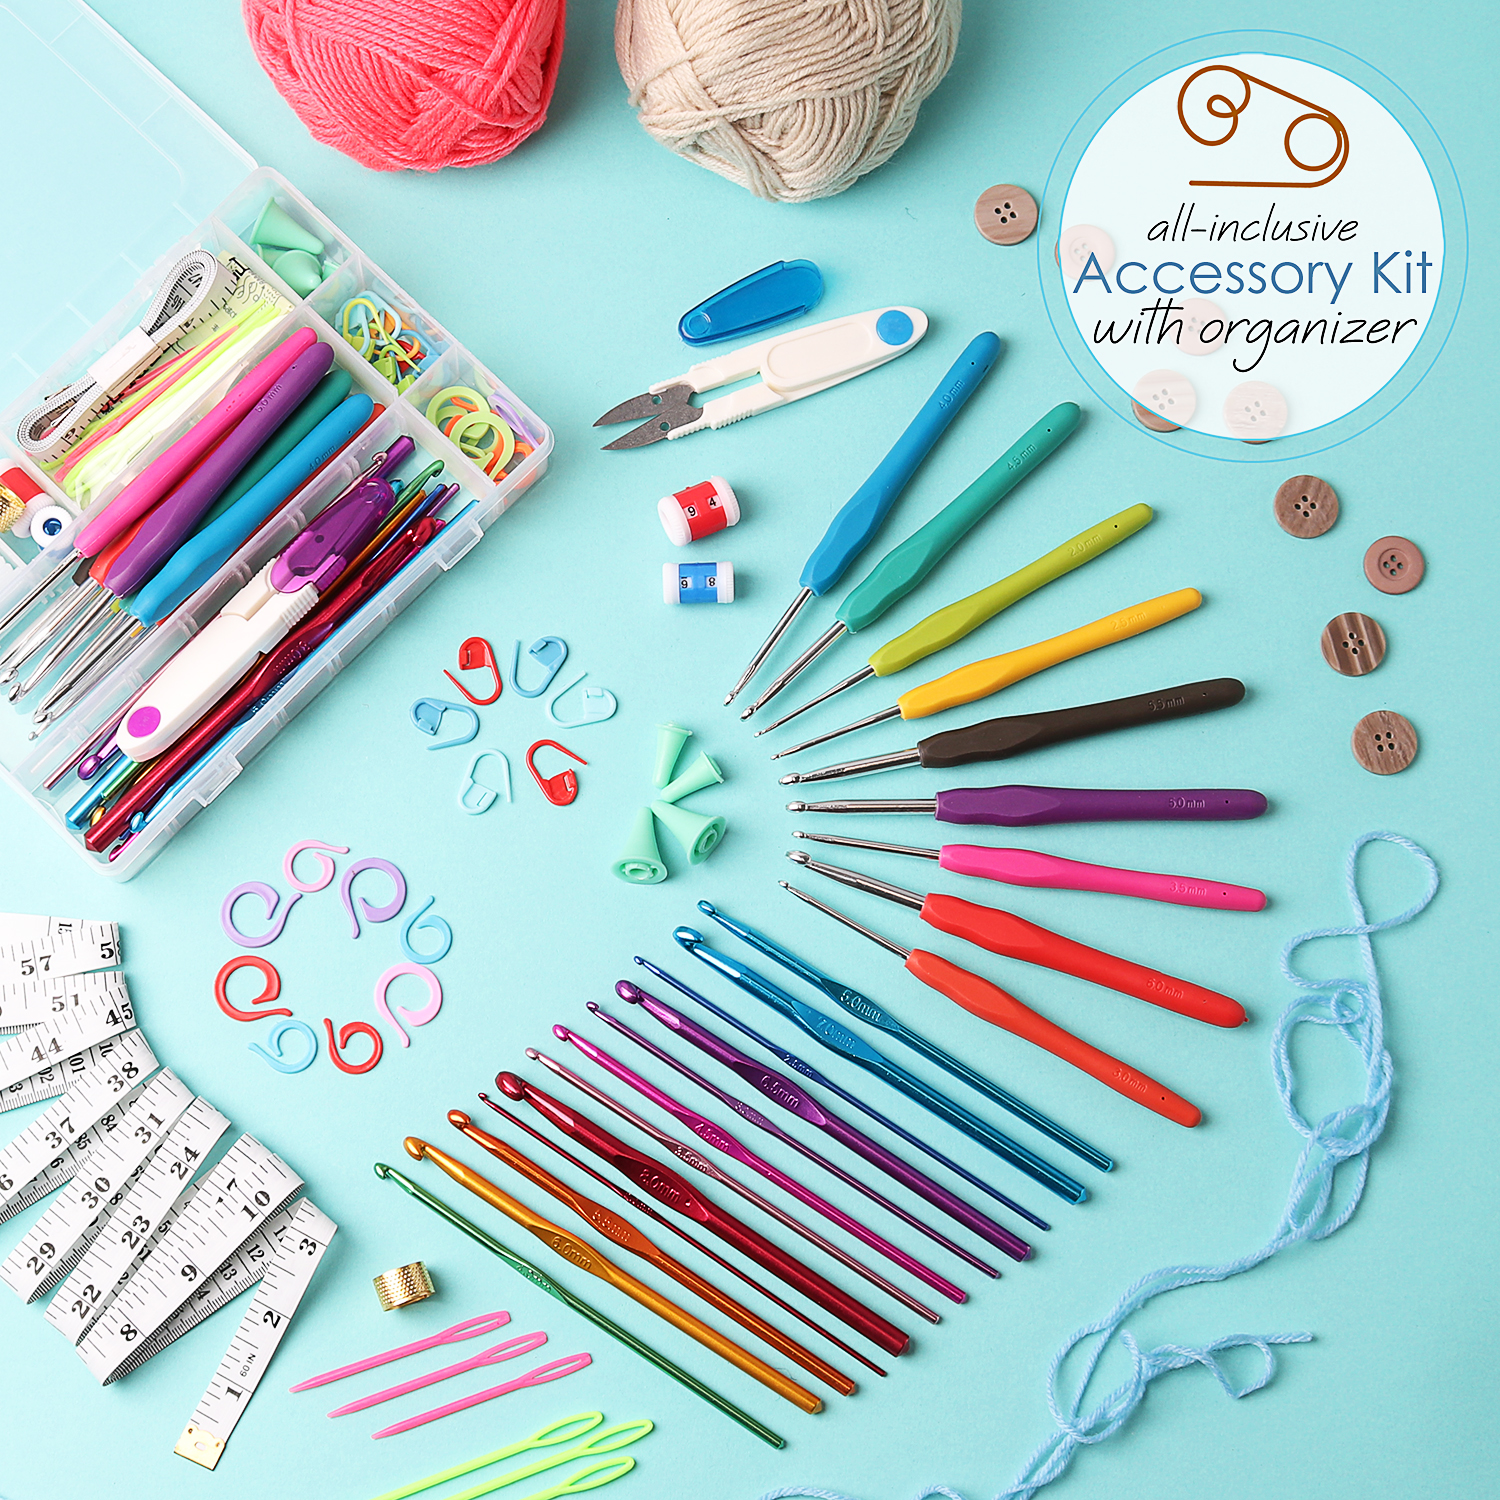 50 Piece Crochet Kit With Crochet Hooks Yarn Set - Premium Bundle Includes  Yarn Balls, Needles, Accessories Kit, Canvas Tote Bag And Lot More